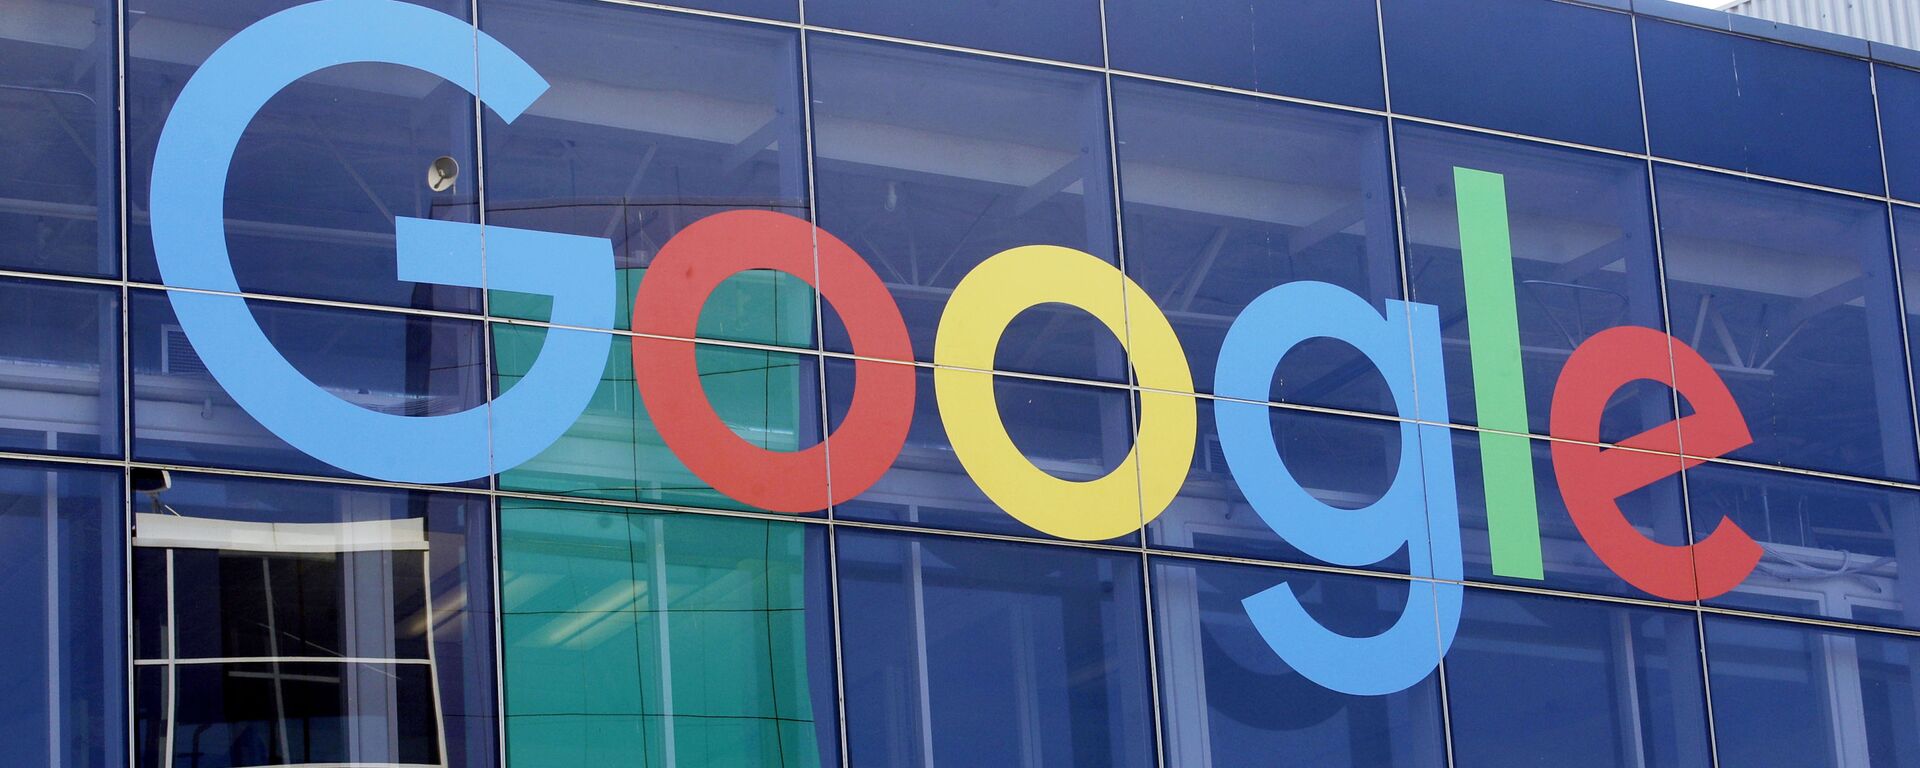 In this Sept. 24, 2019, file photo a sign is shown on a Google building at their campus in Mountain View, Calif. Google is formally pushing back on antitrust claims brought against it by the Justice Department two months ago. - Sputnik International, 1920, 10.02.2022